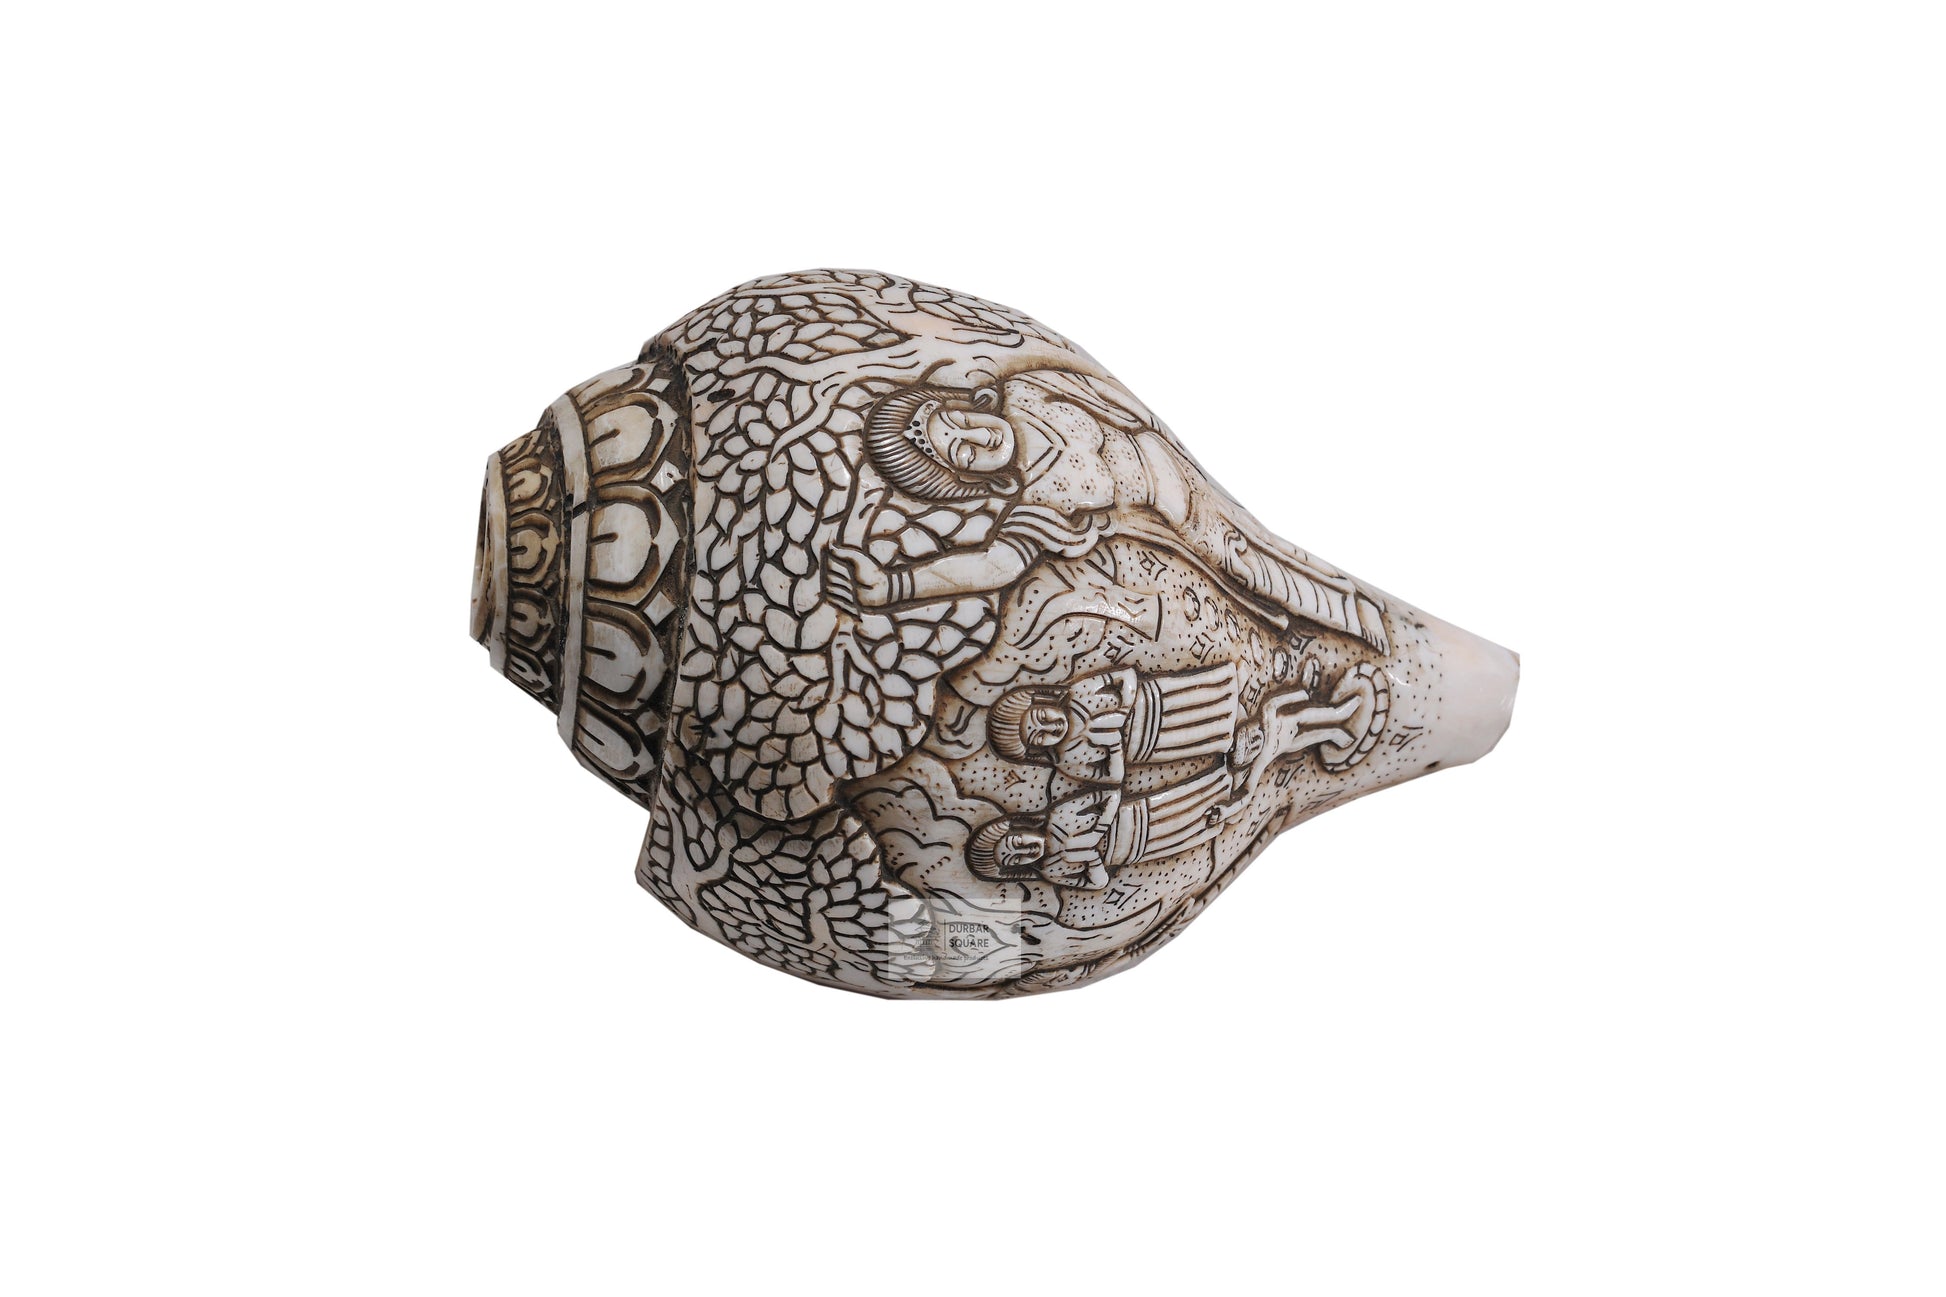 Carved Sankha (Conch Shell)